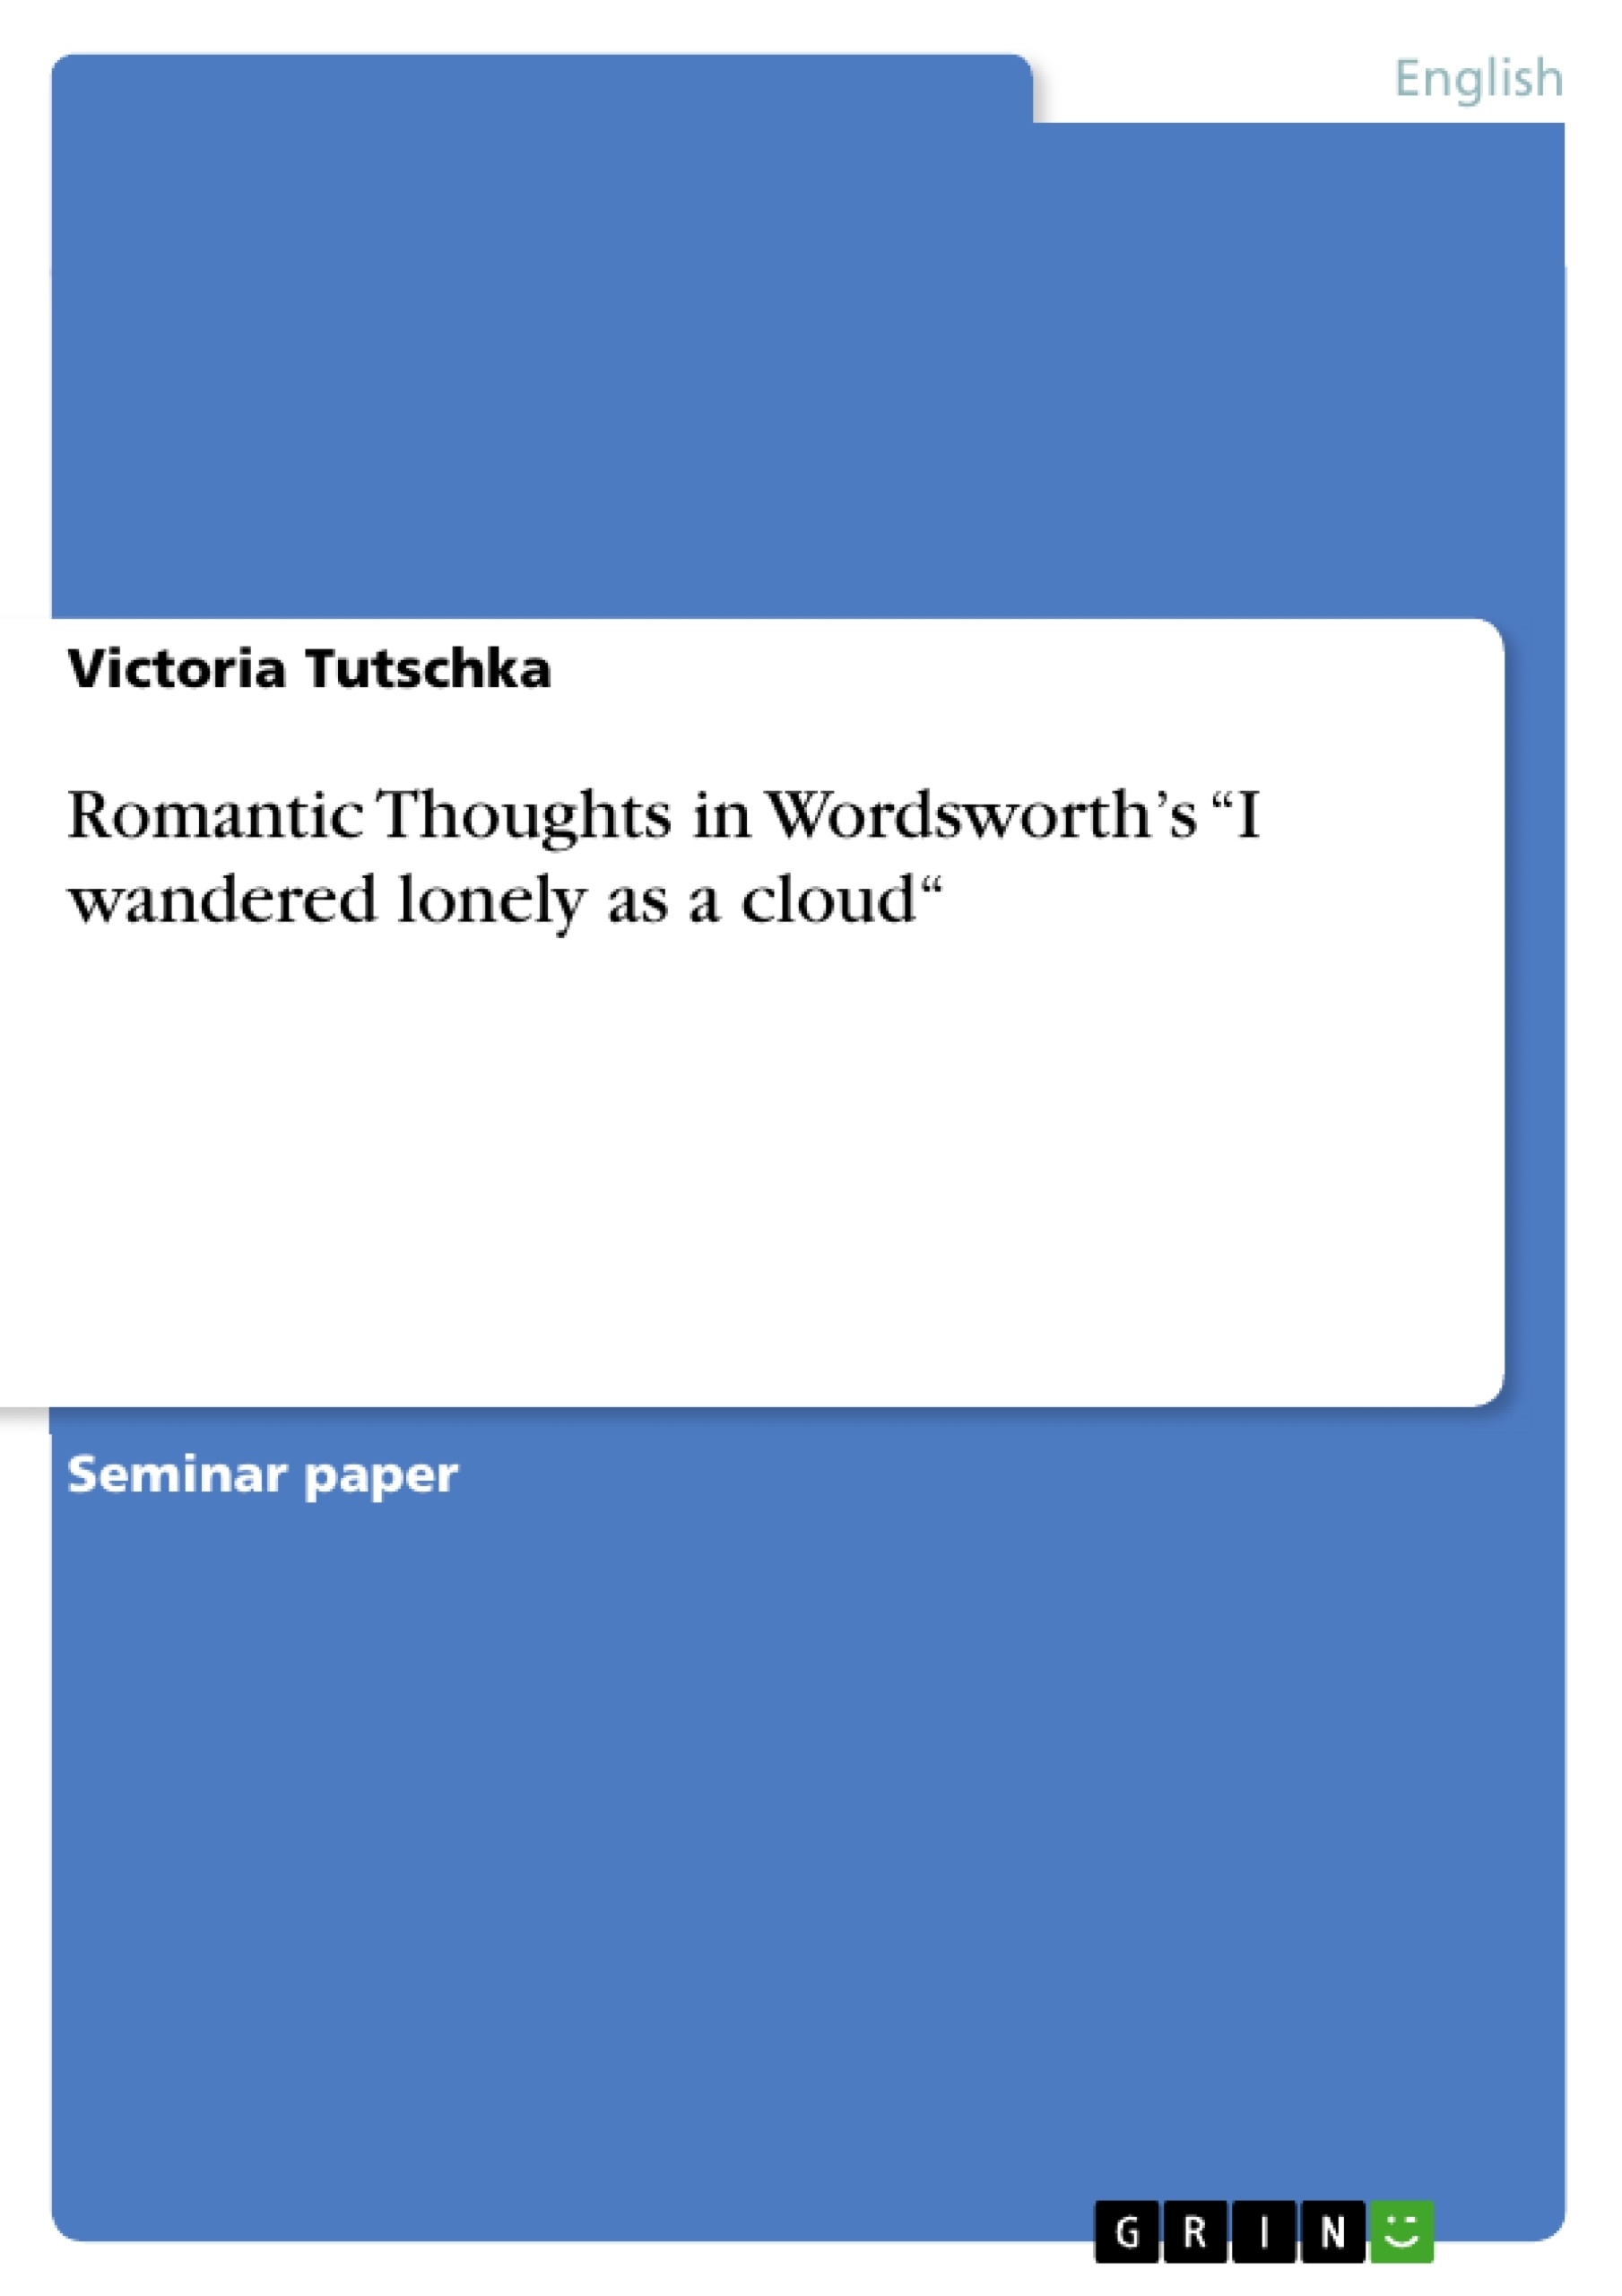 Titre: Romantic Thoughts in Wordsworth’s  “I wandered lonely as a cloud“